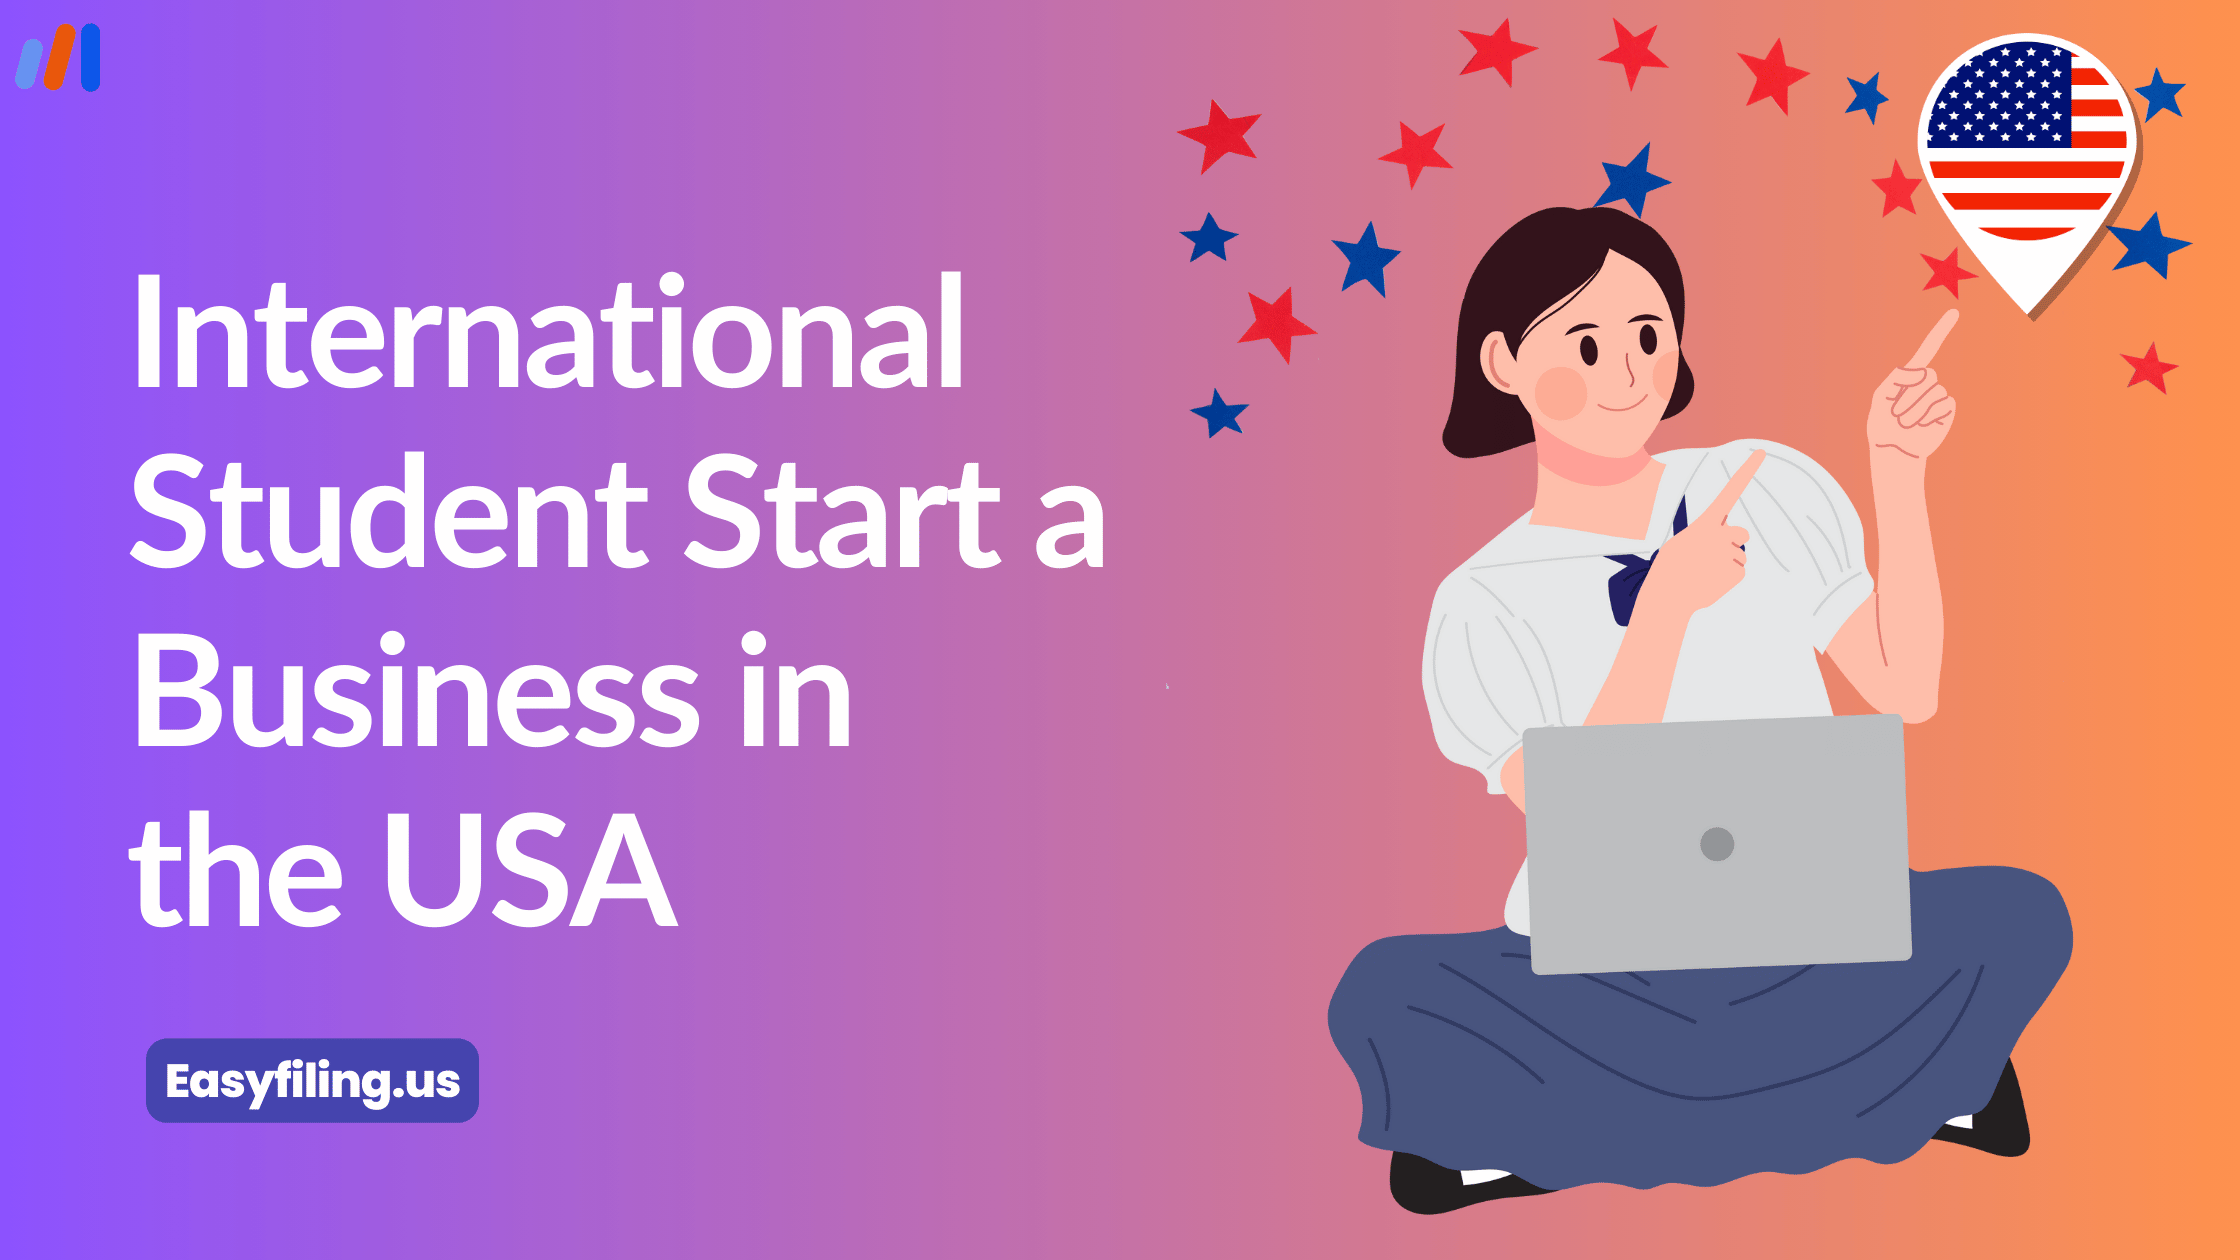 Can an International Student Start a Business in the USA?